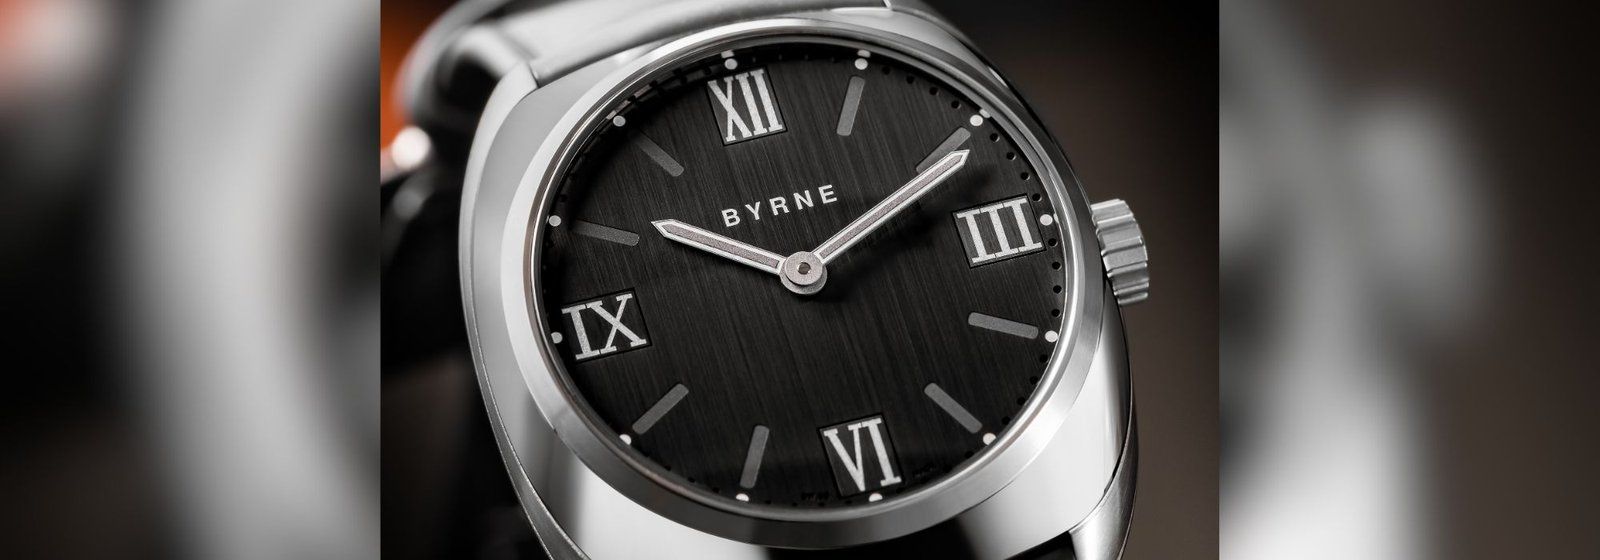 Customization Takes A New Meaning With The Launch Of Byrne Watch GyroDial